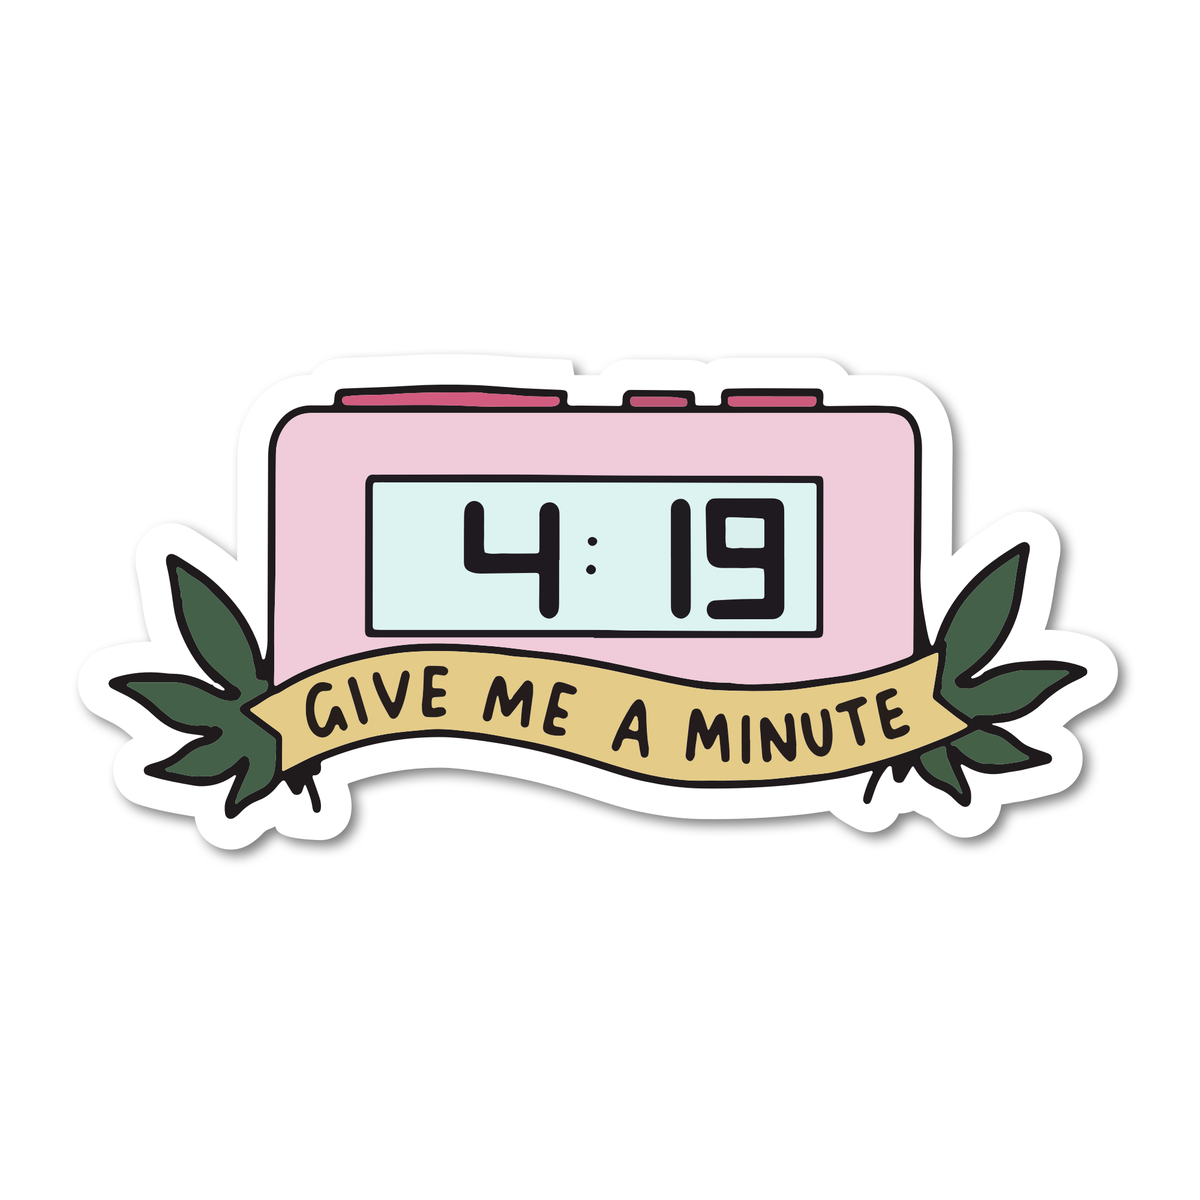 4:19 On The Clock, Gimme a Minute  Stoner Sticker